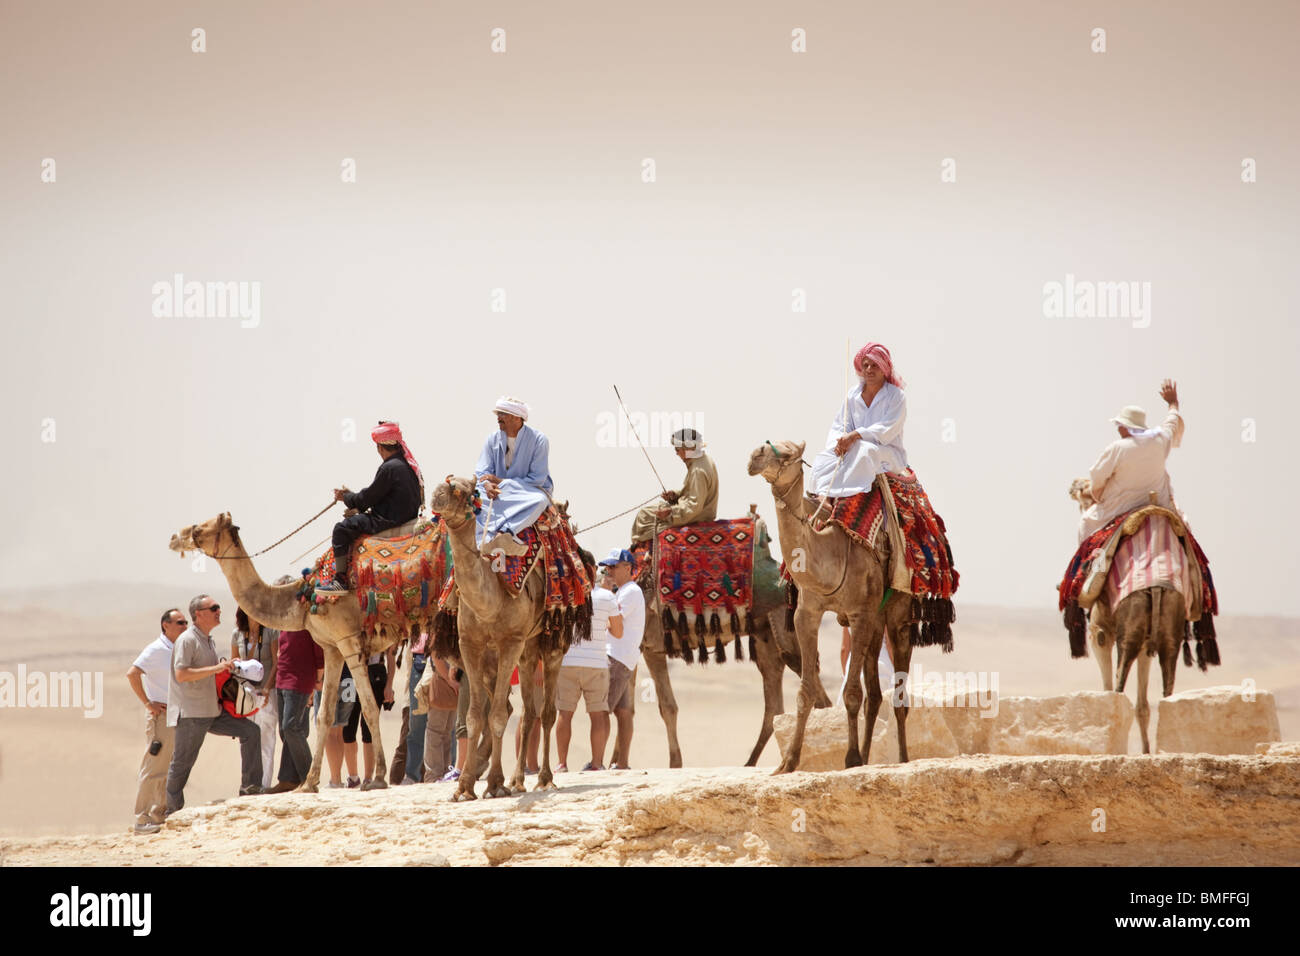 A group of Bedouin arabs and their camels, Giza plateau, Cairo, Egypt, Africa Stock Photo